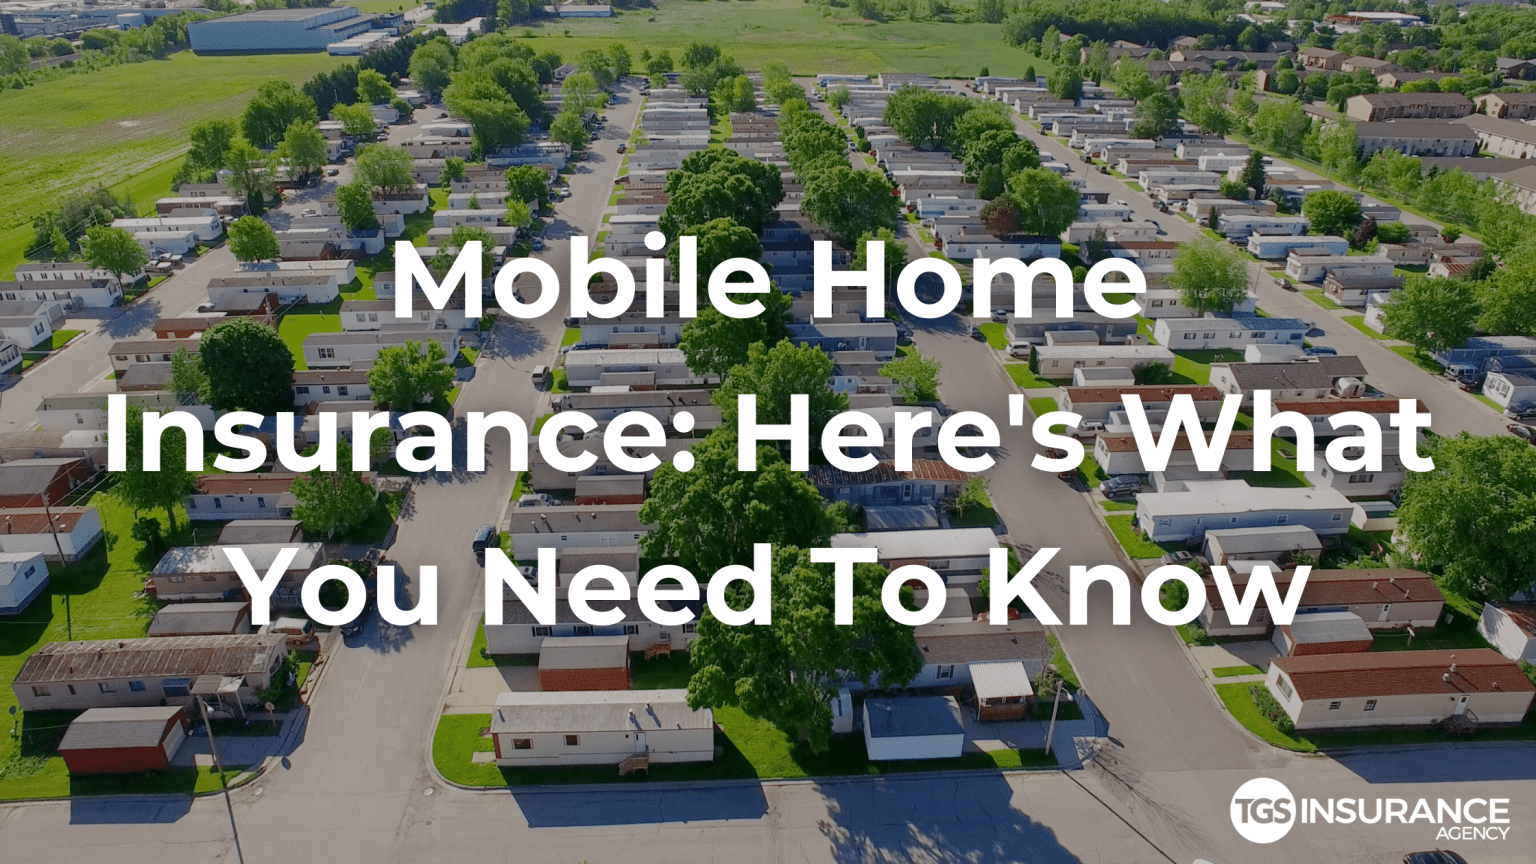 Mobile Home Insurance Heres What You Need To Know Tgs Insurance Agency 5318